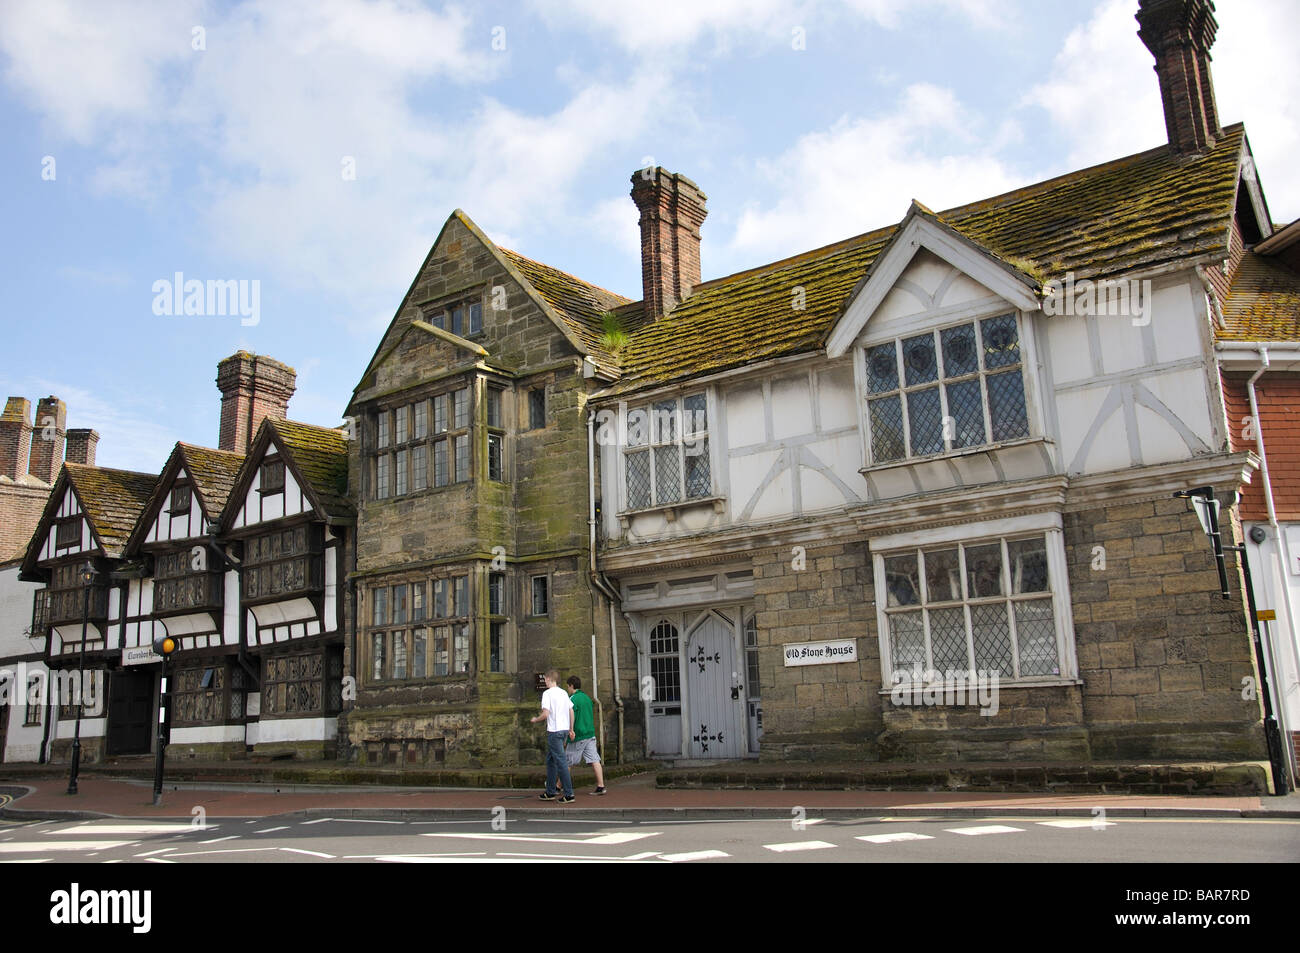 Old Stone House, High Street, East Grinstead, Sussex de l'Ouest, Angleterre, Royaume-Uni Banque D'Images